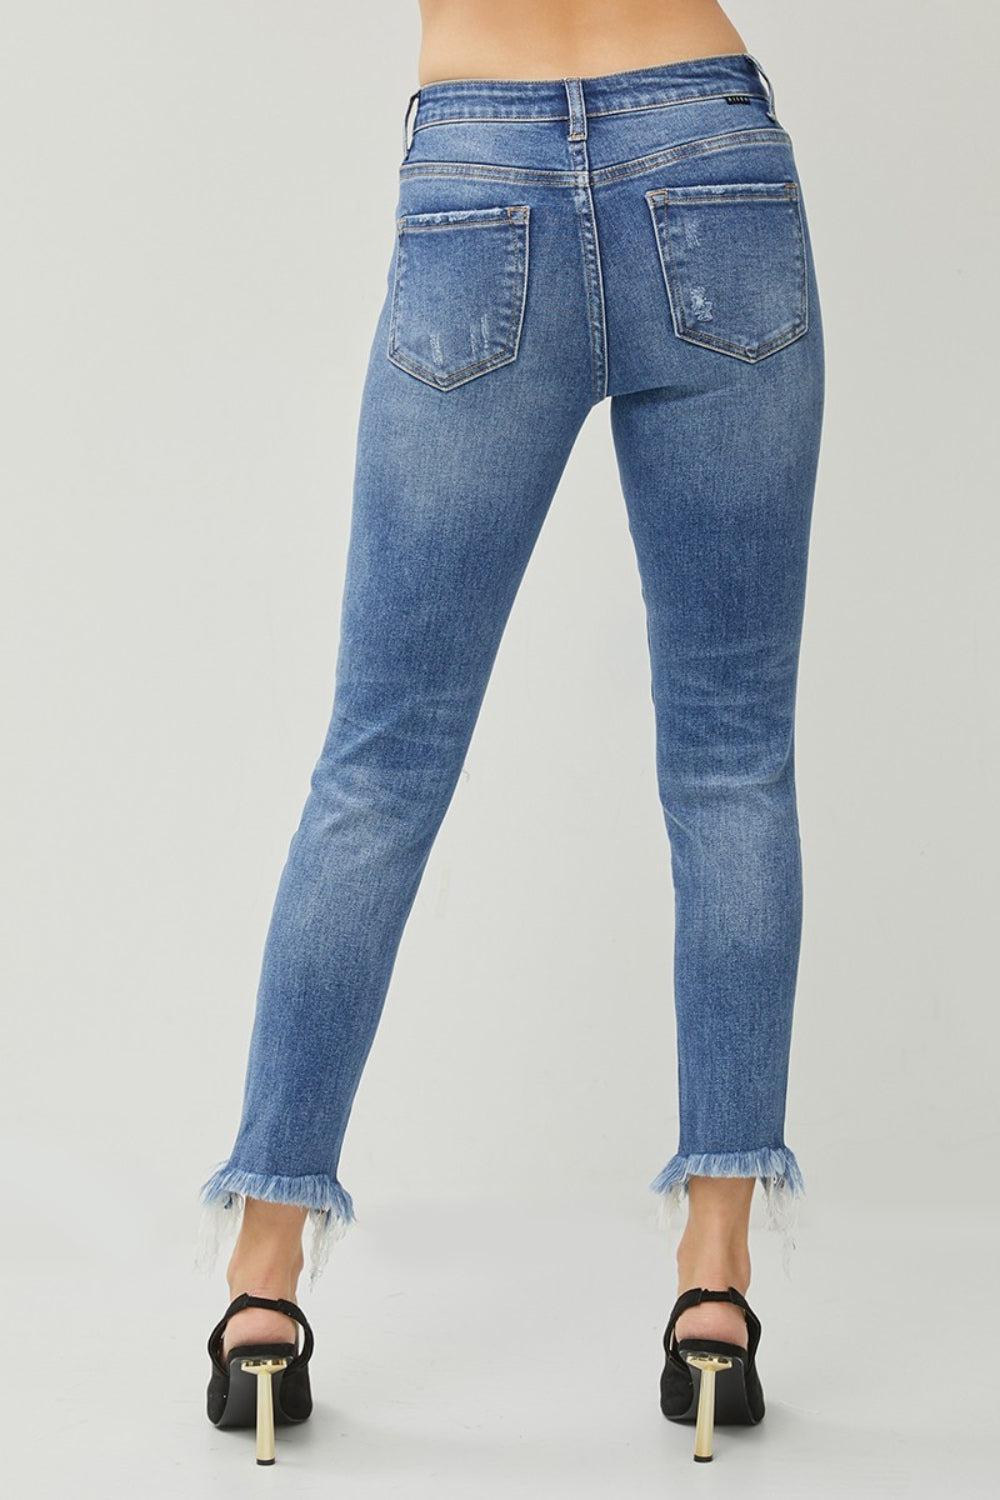 a woman wearing high rise jeans with fraying